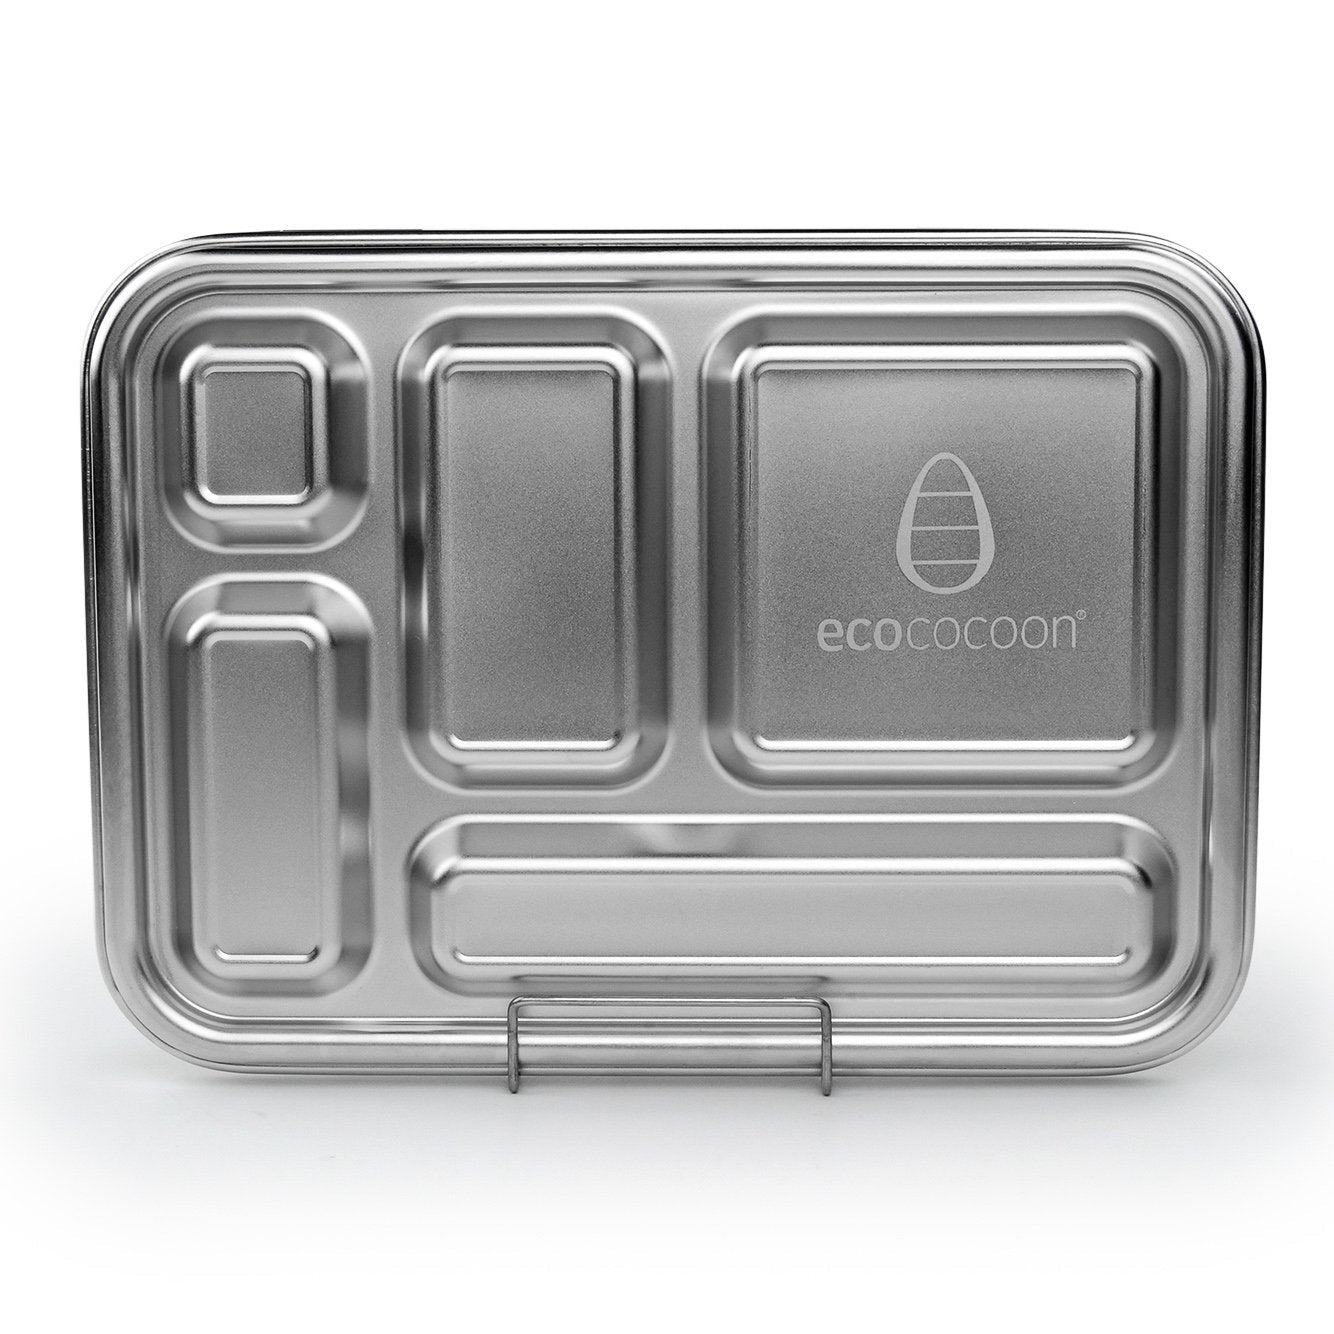 Ecococoon Stainless Steel Leakproof Bento Box - 5 compartment - Grape